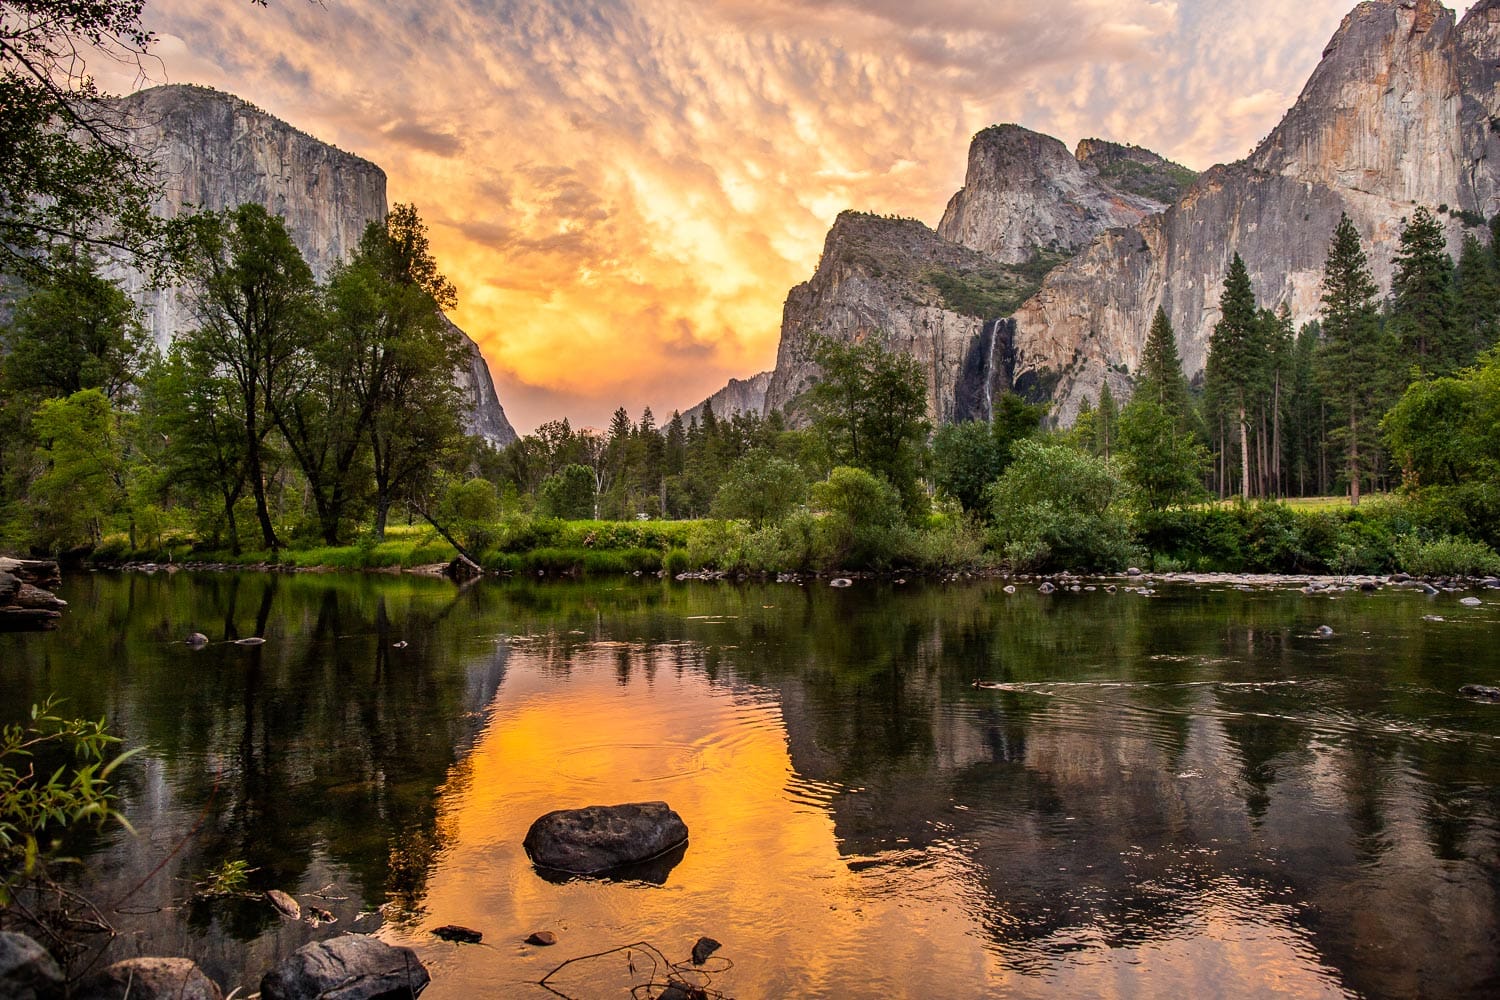 A stunning sunset at valley view in Yosemite by Yosemite national park photographer Lucy Schultz.